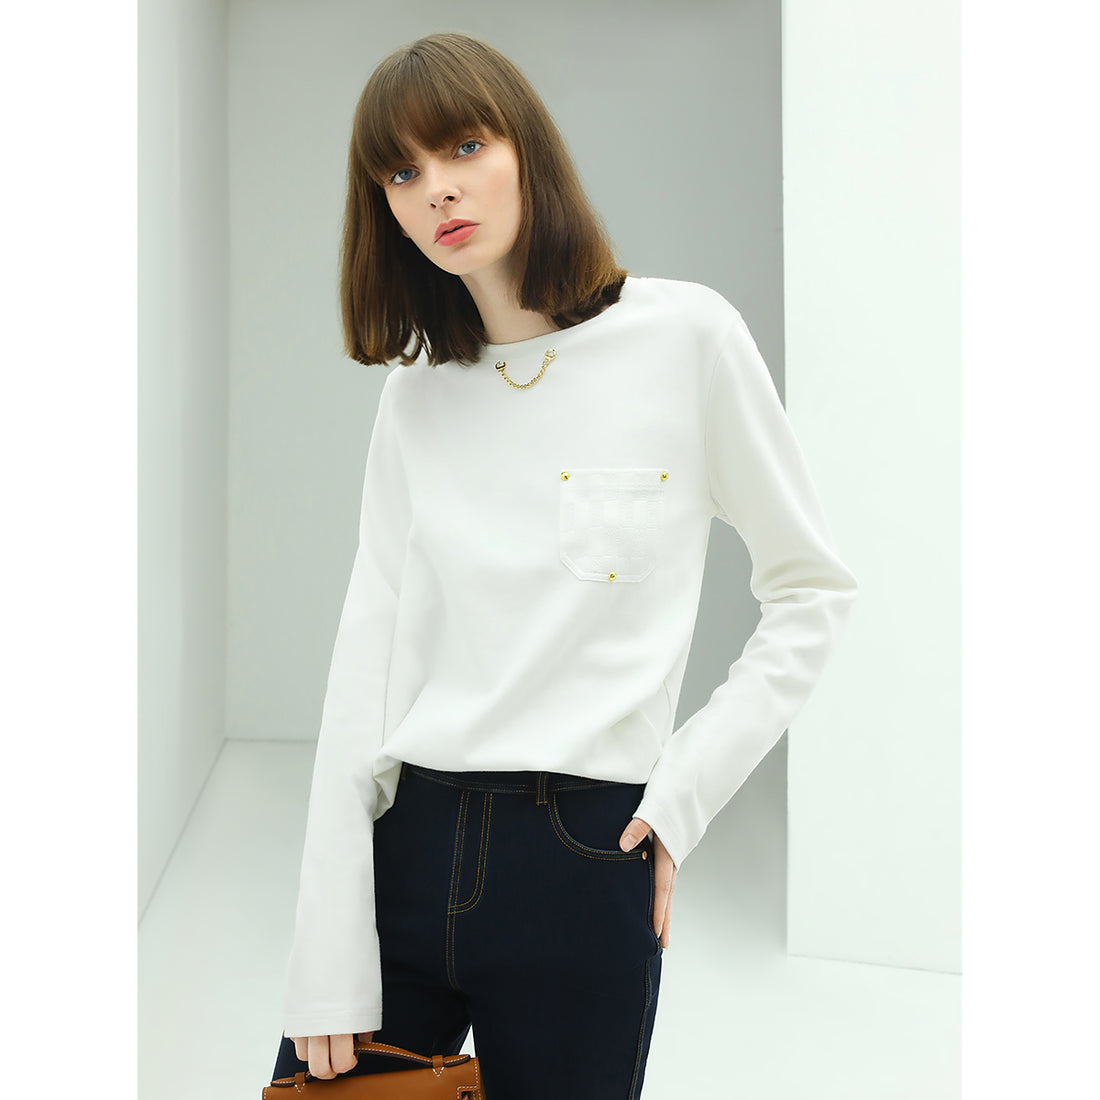 white-long-sleeved-tee-with-neck-chain_all_white_1.jpg